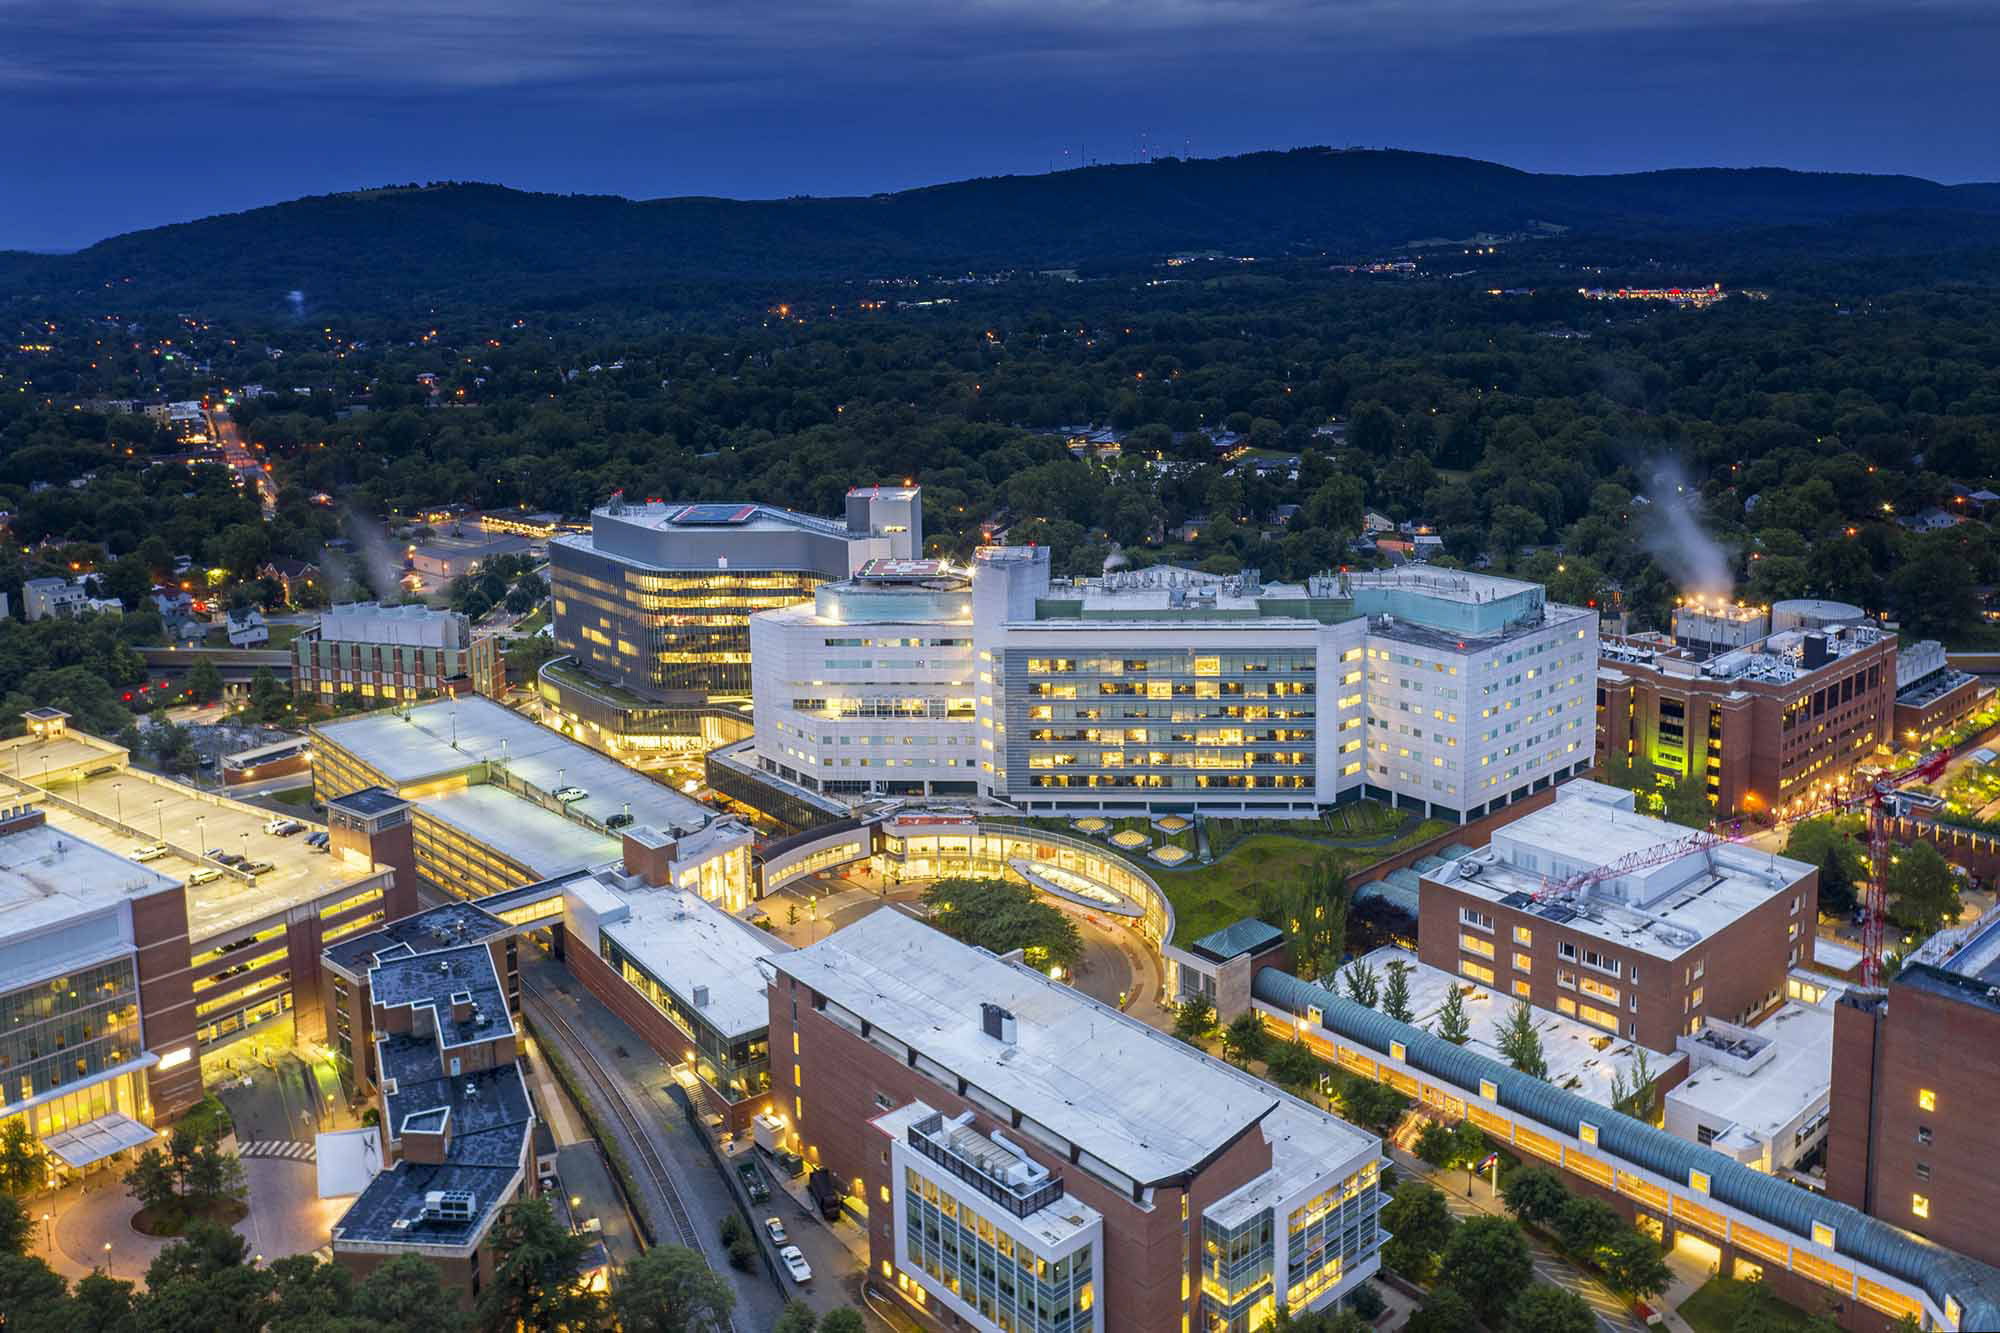 Arial view of the UVA Health Center Buildings at night